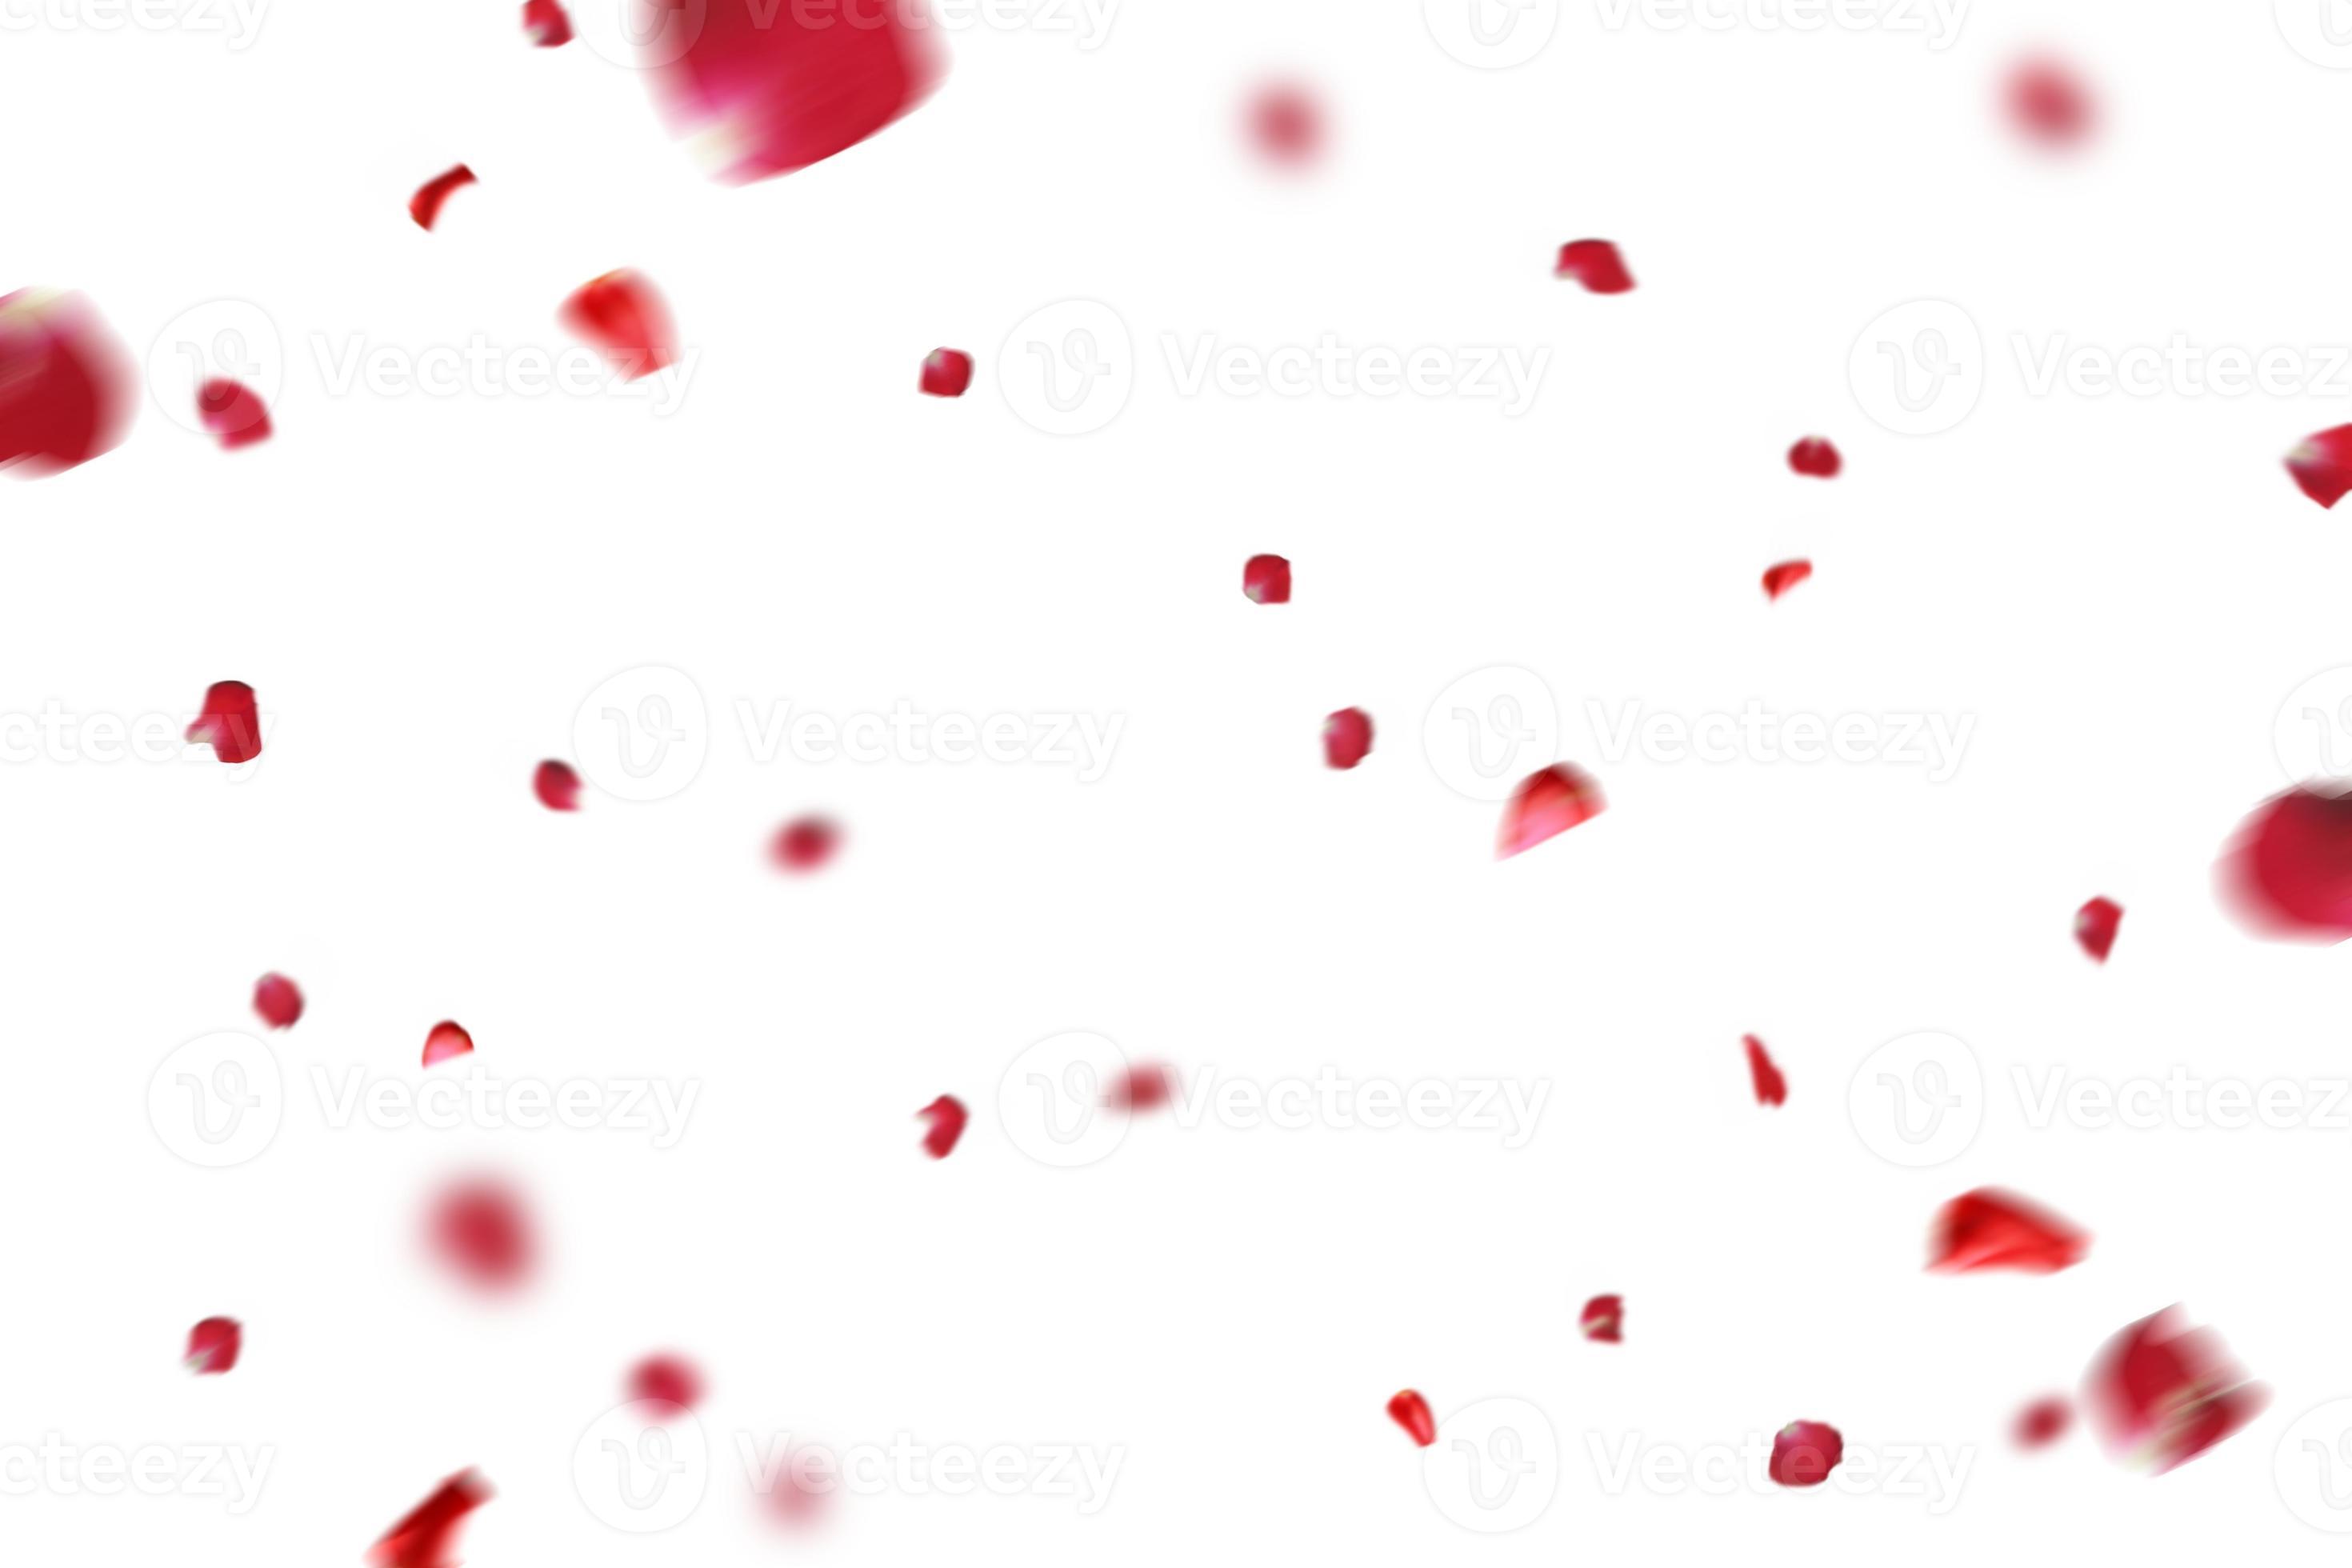 Rose Petals Effect For Overlay - Stock Motion Graphics